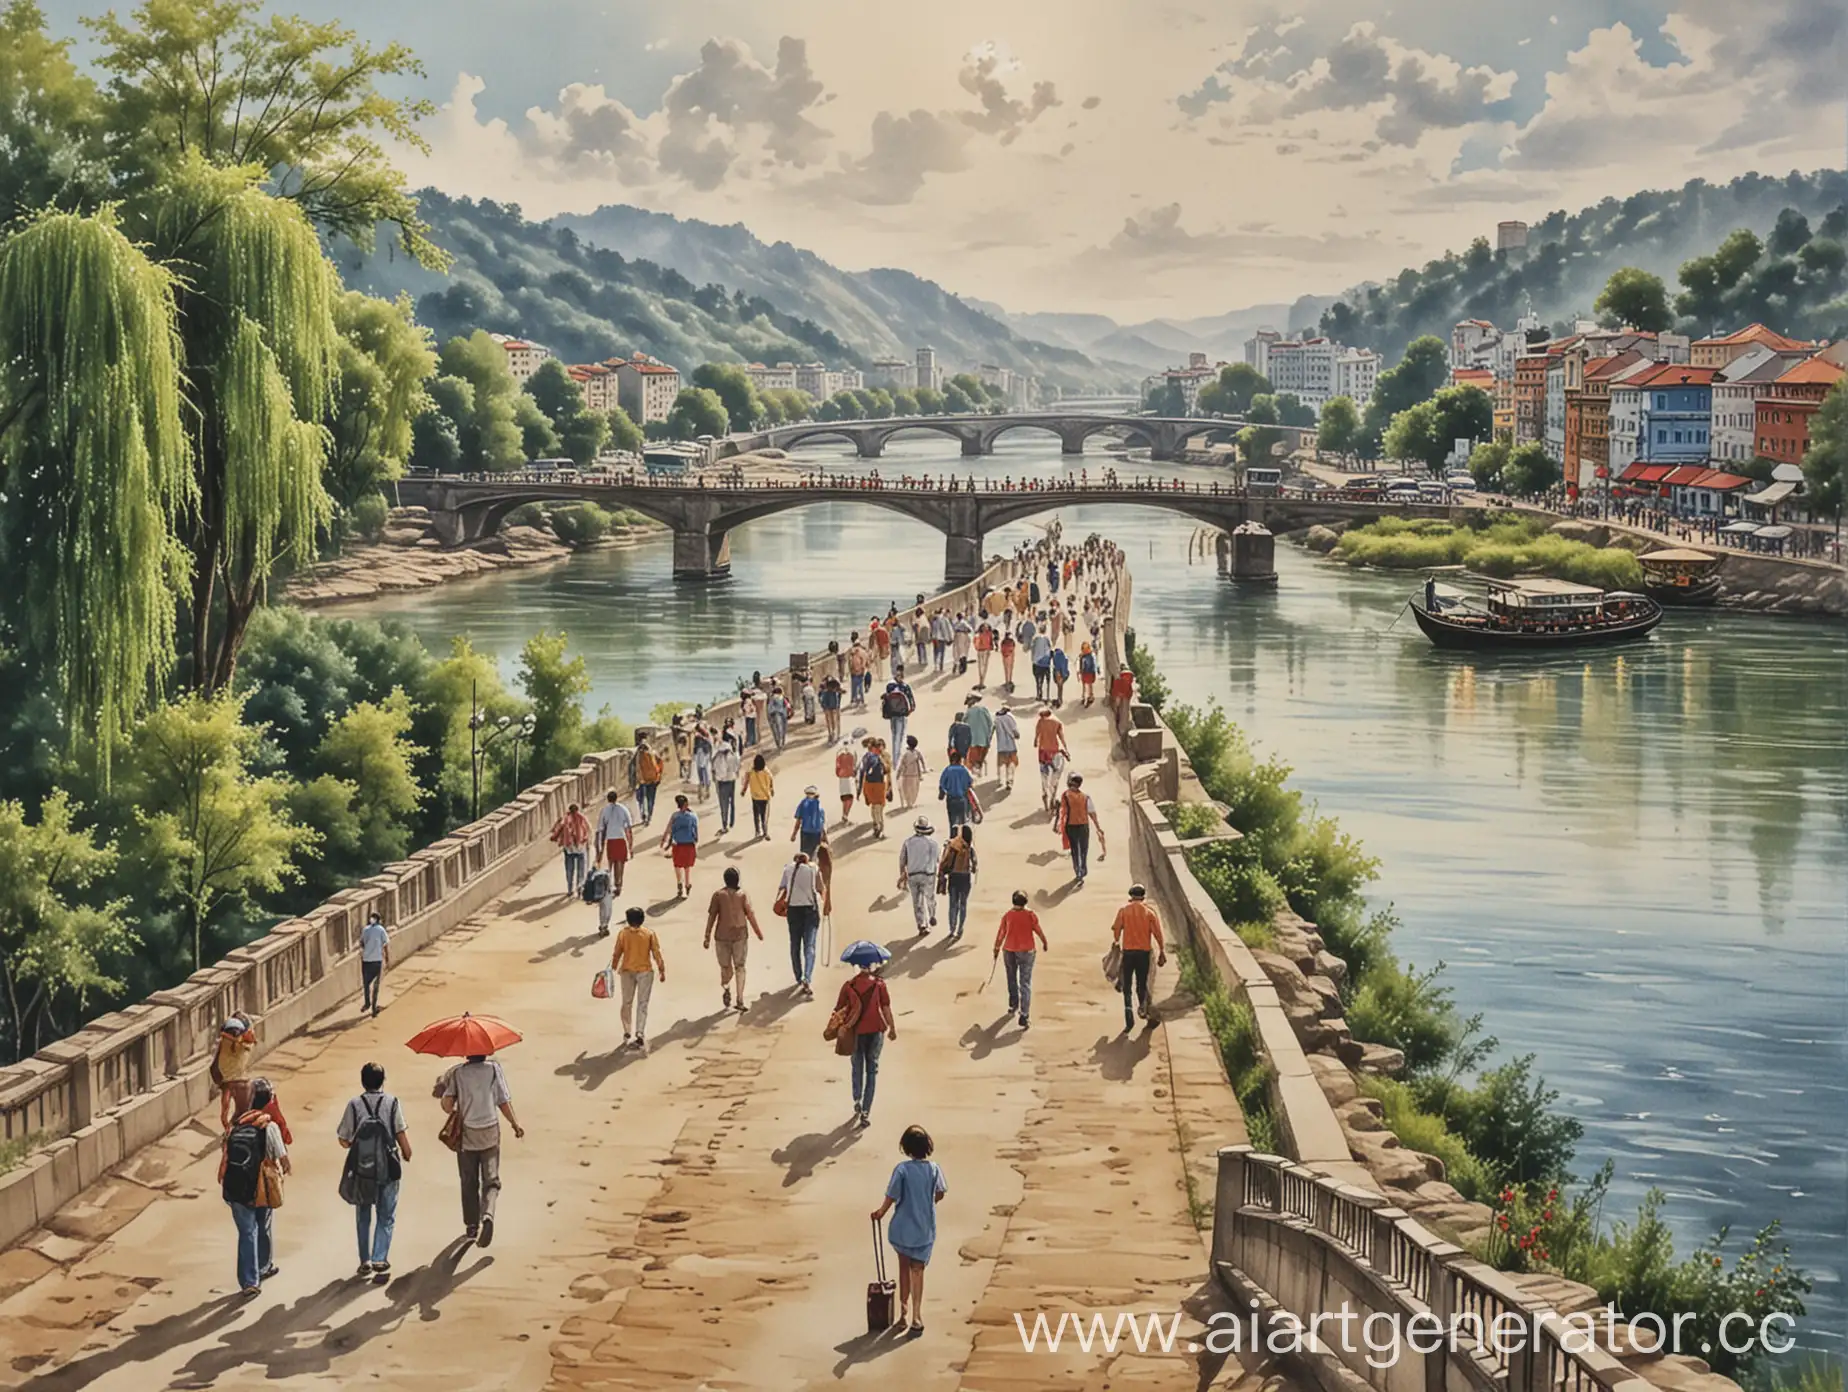 draw tourists walking along the river in this picture